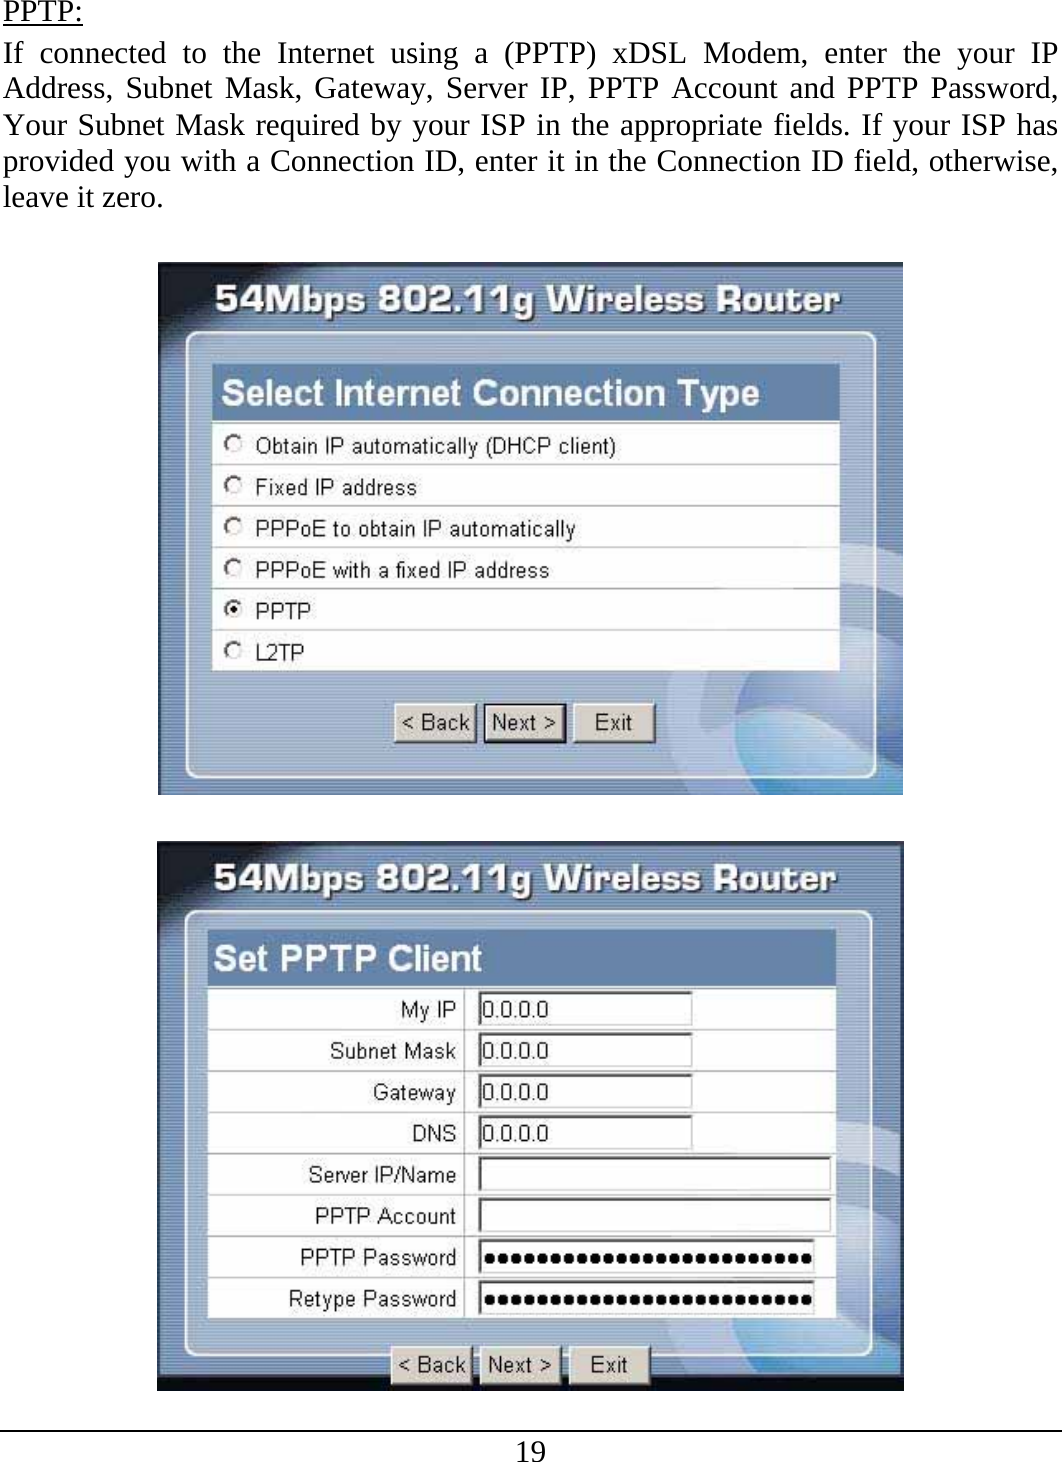 19 PPTP: If connected to the Internet using a (PPTP) xDSL Modem, enter the your IP Address, Subnet Mask, Gateway, Server IP, PPTP Account and PPTP Password, Your Subnet Mask required by your ISP in the appropriate fields. If your ISP has provided you with a Connection ID, enter it in the Connection ID field, otherwise, leave it zero.      